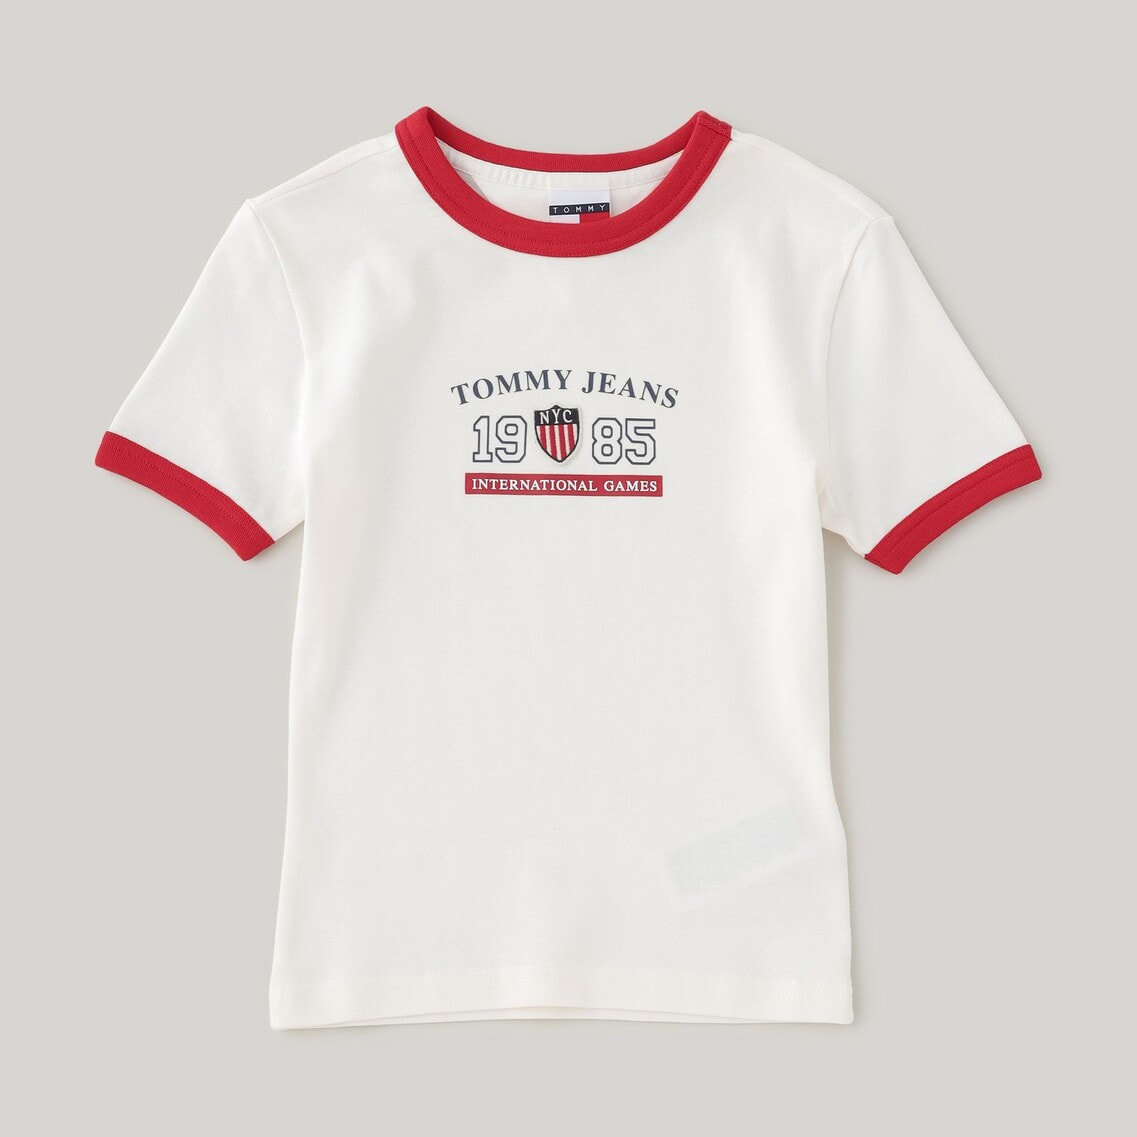 Tommy Jeans International Games リンガーTシャツ | TOMMY HILFIGER 